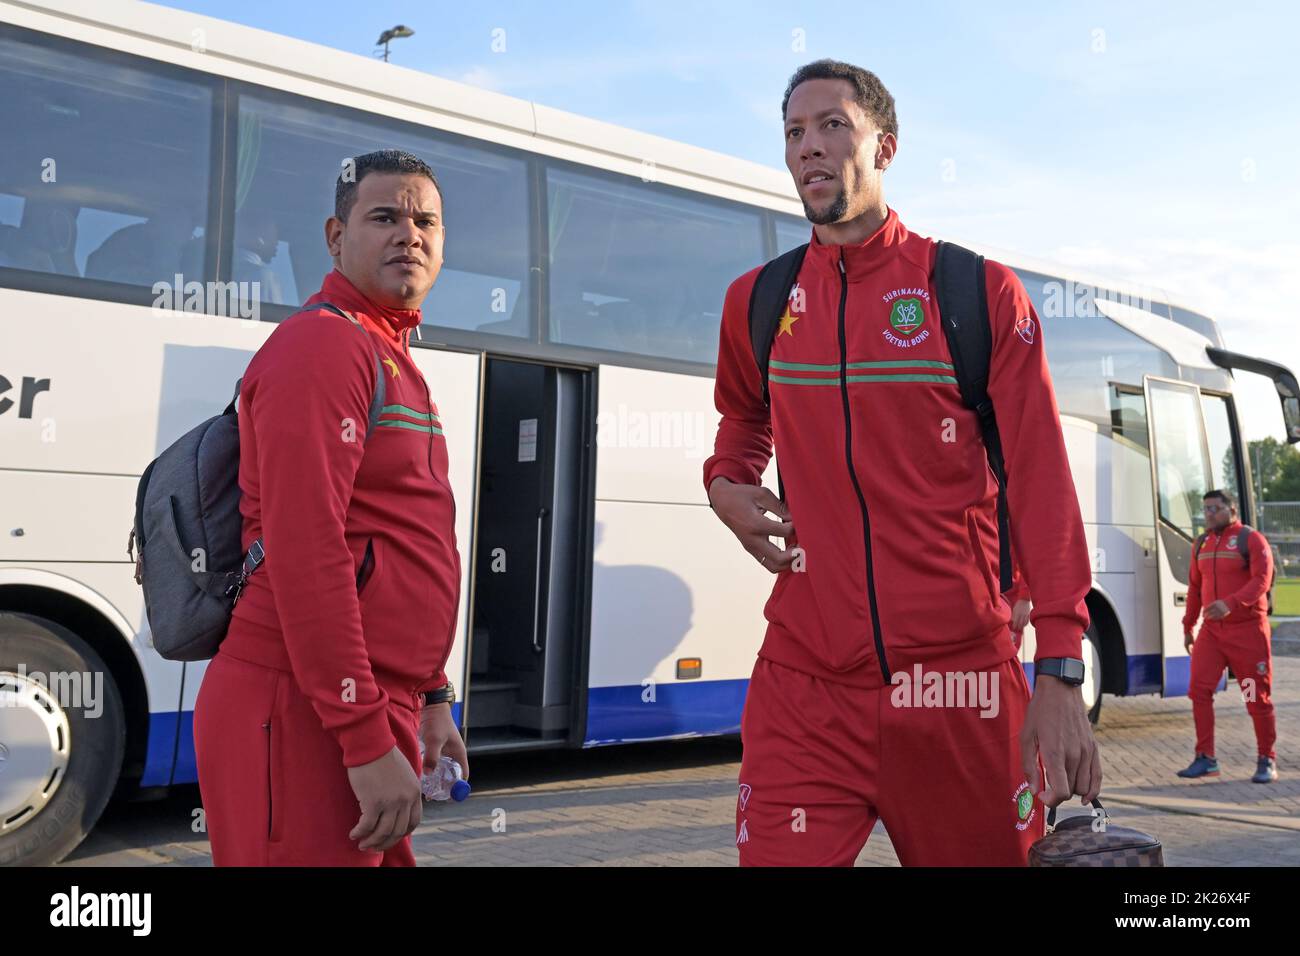 Almere, Netherlands., September 22, 2022, Suriname assistant coach Ryan Koolwijk arrives at the Almere City FC complex during the International friendly match between Suriname and Nicaragua at the Yanmar Stadium on September 22, 2022 in Almere, Netherlands. ANP | Dutch Height | Gerrit van Keulen Stock Photo